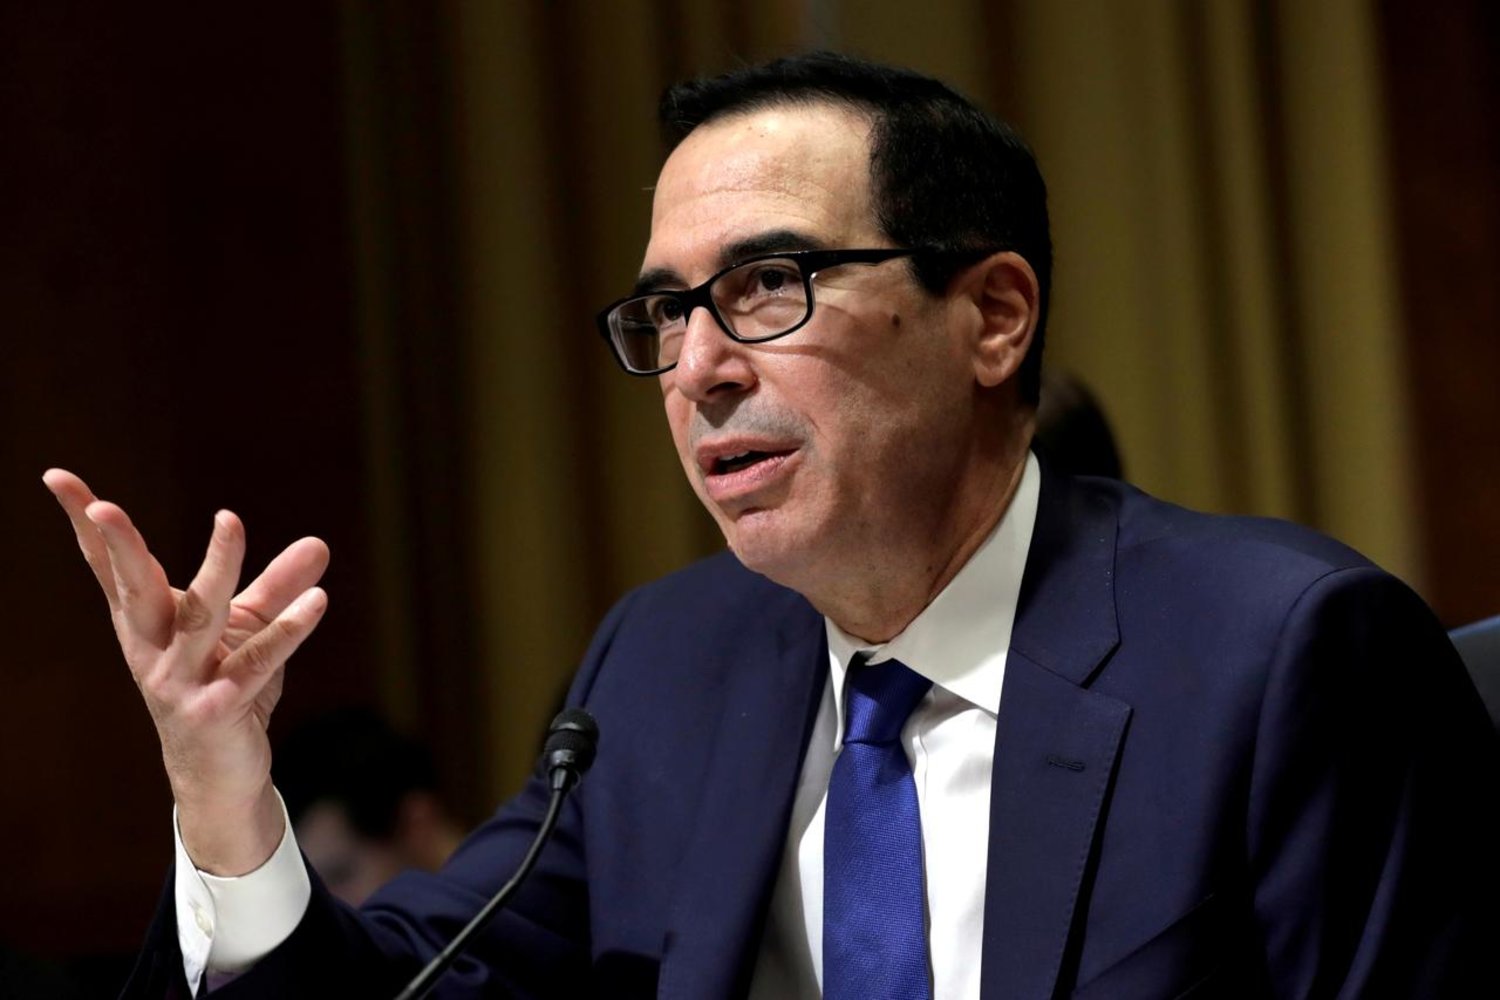 FILE PHOTO: US Treasury Secretary Steven Mnuchin testifies before the Senate Finance Committee during a hearing on the President's FY2021 Budget on Capitol Hill in Washington, US, February 12, 2020. REUTERS/Yuri Gripas/File Photo/File Photo